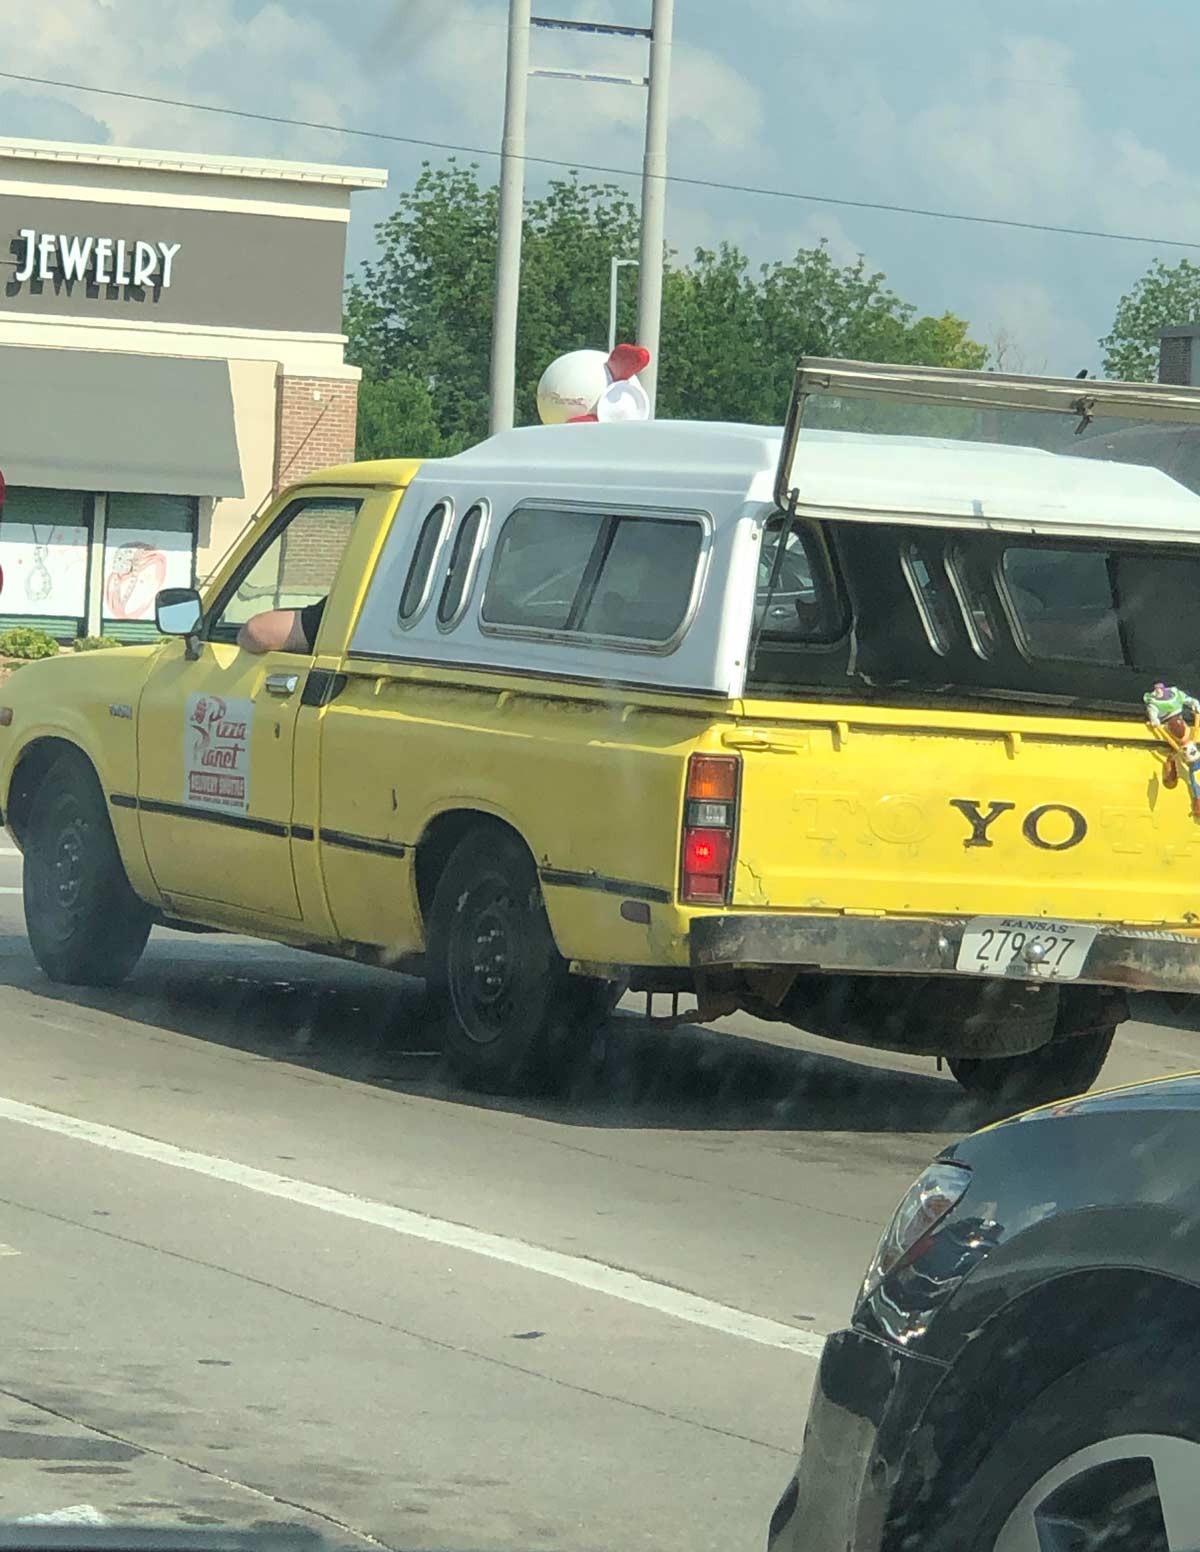 I saw the Pizza Planet truck on my way home from work today